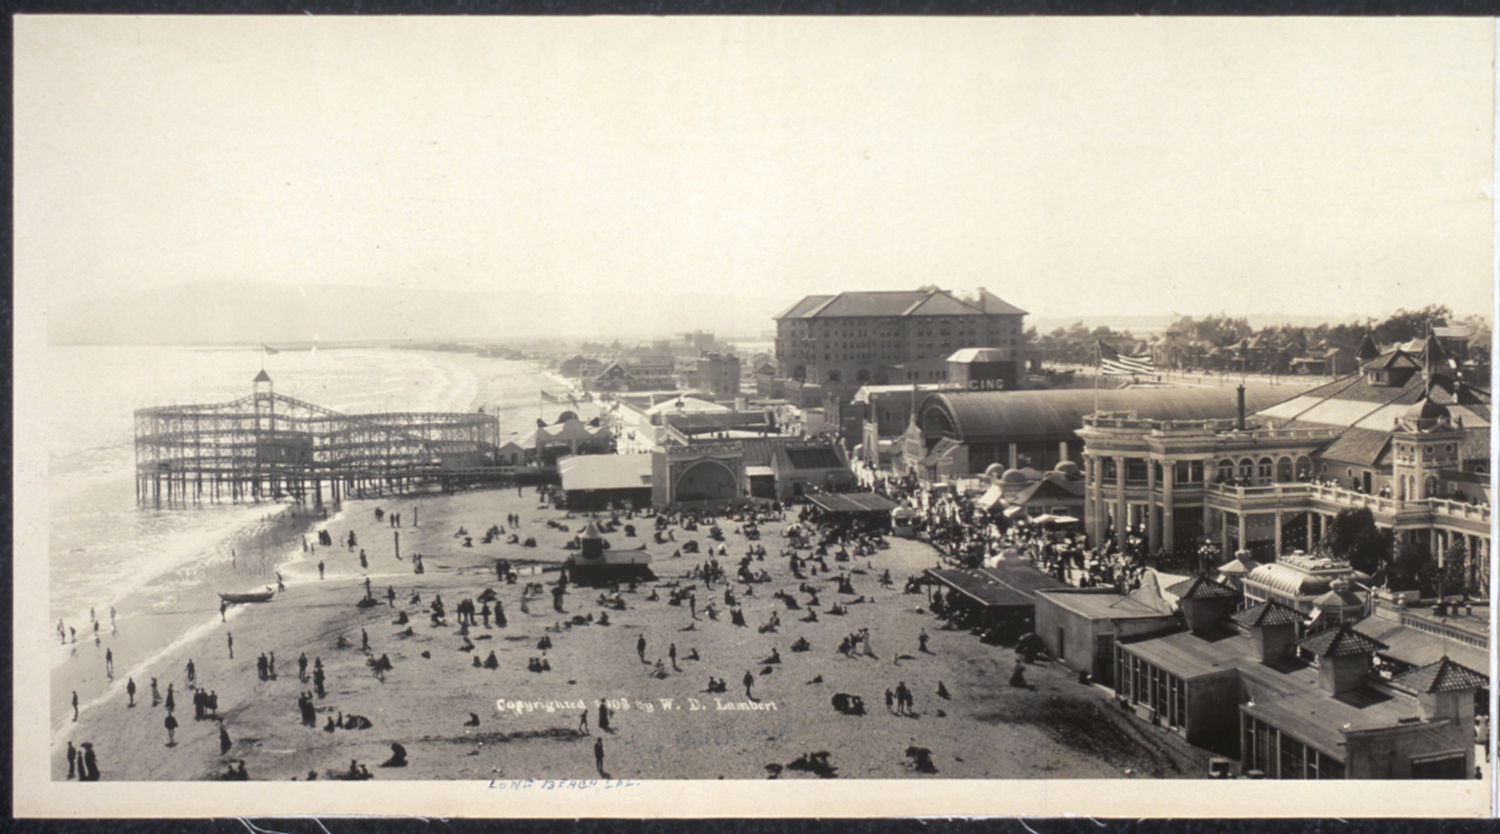 Panel 1 of 3 - A panoramic shot of Long Beach looking north up Pine Avenue and west along the shore, 1908. Before any Port development had begun, beach is all that could be seen. The First National Bank of Long Beach at First Street and Pine Avenue, built in 1906 (seen in Panel 3), is still a familiar landmark today and houses Italian restaurant L'Opera.